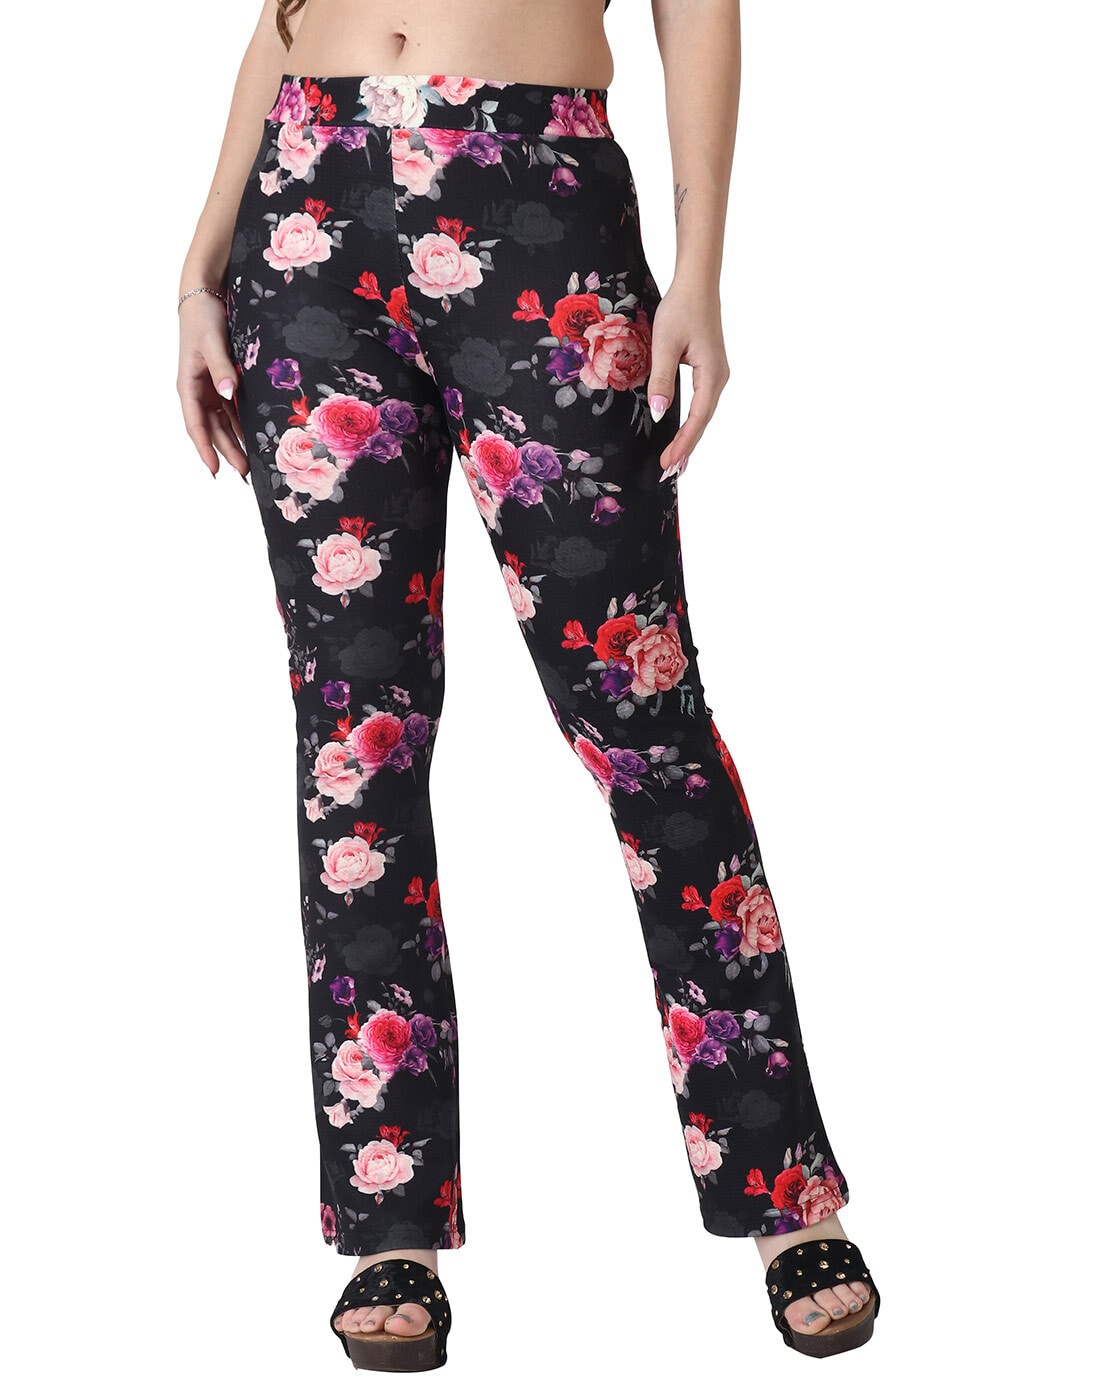 symoid Amazon My Orders Palazzo Pants for Women Dressy Casual Wide Leg  Floral Print Beach Pant with Pockets Elastic Waist Flowy Linen Trousers  Return Boxes Mystery from Amazon Black S at Amazon